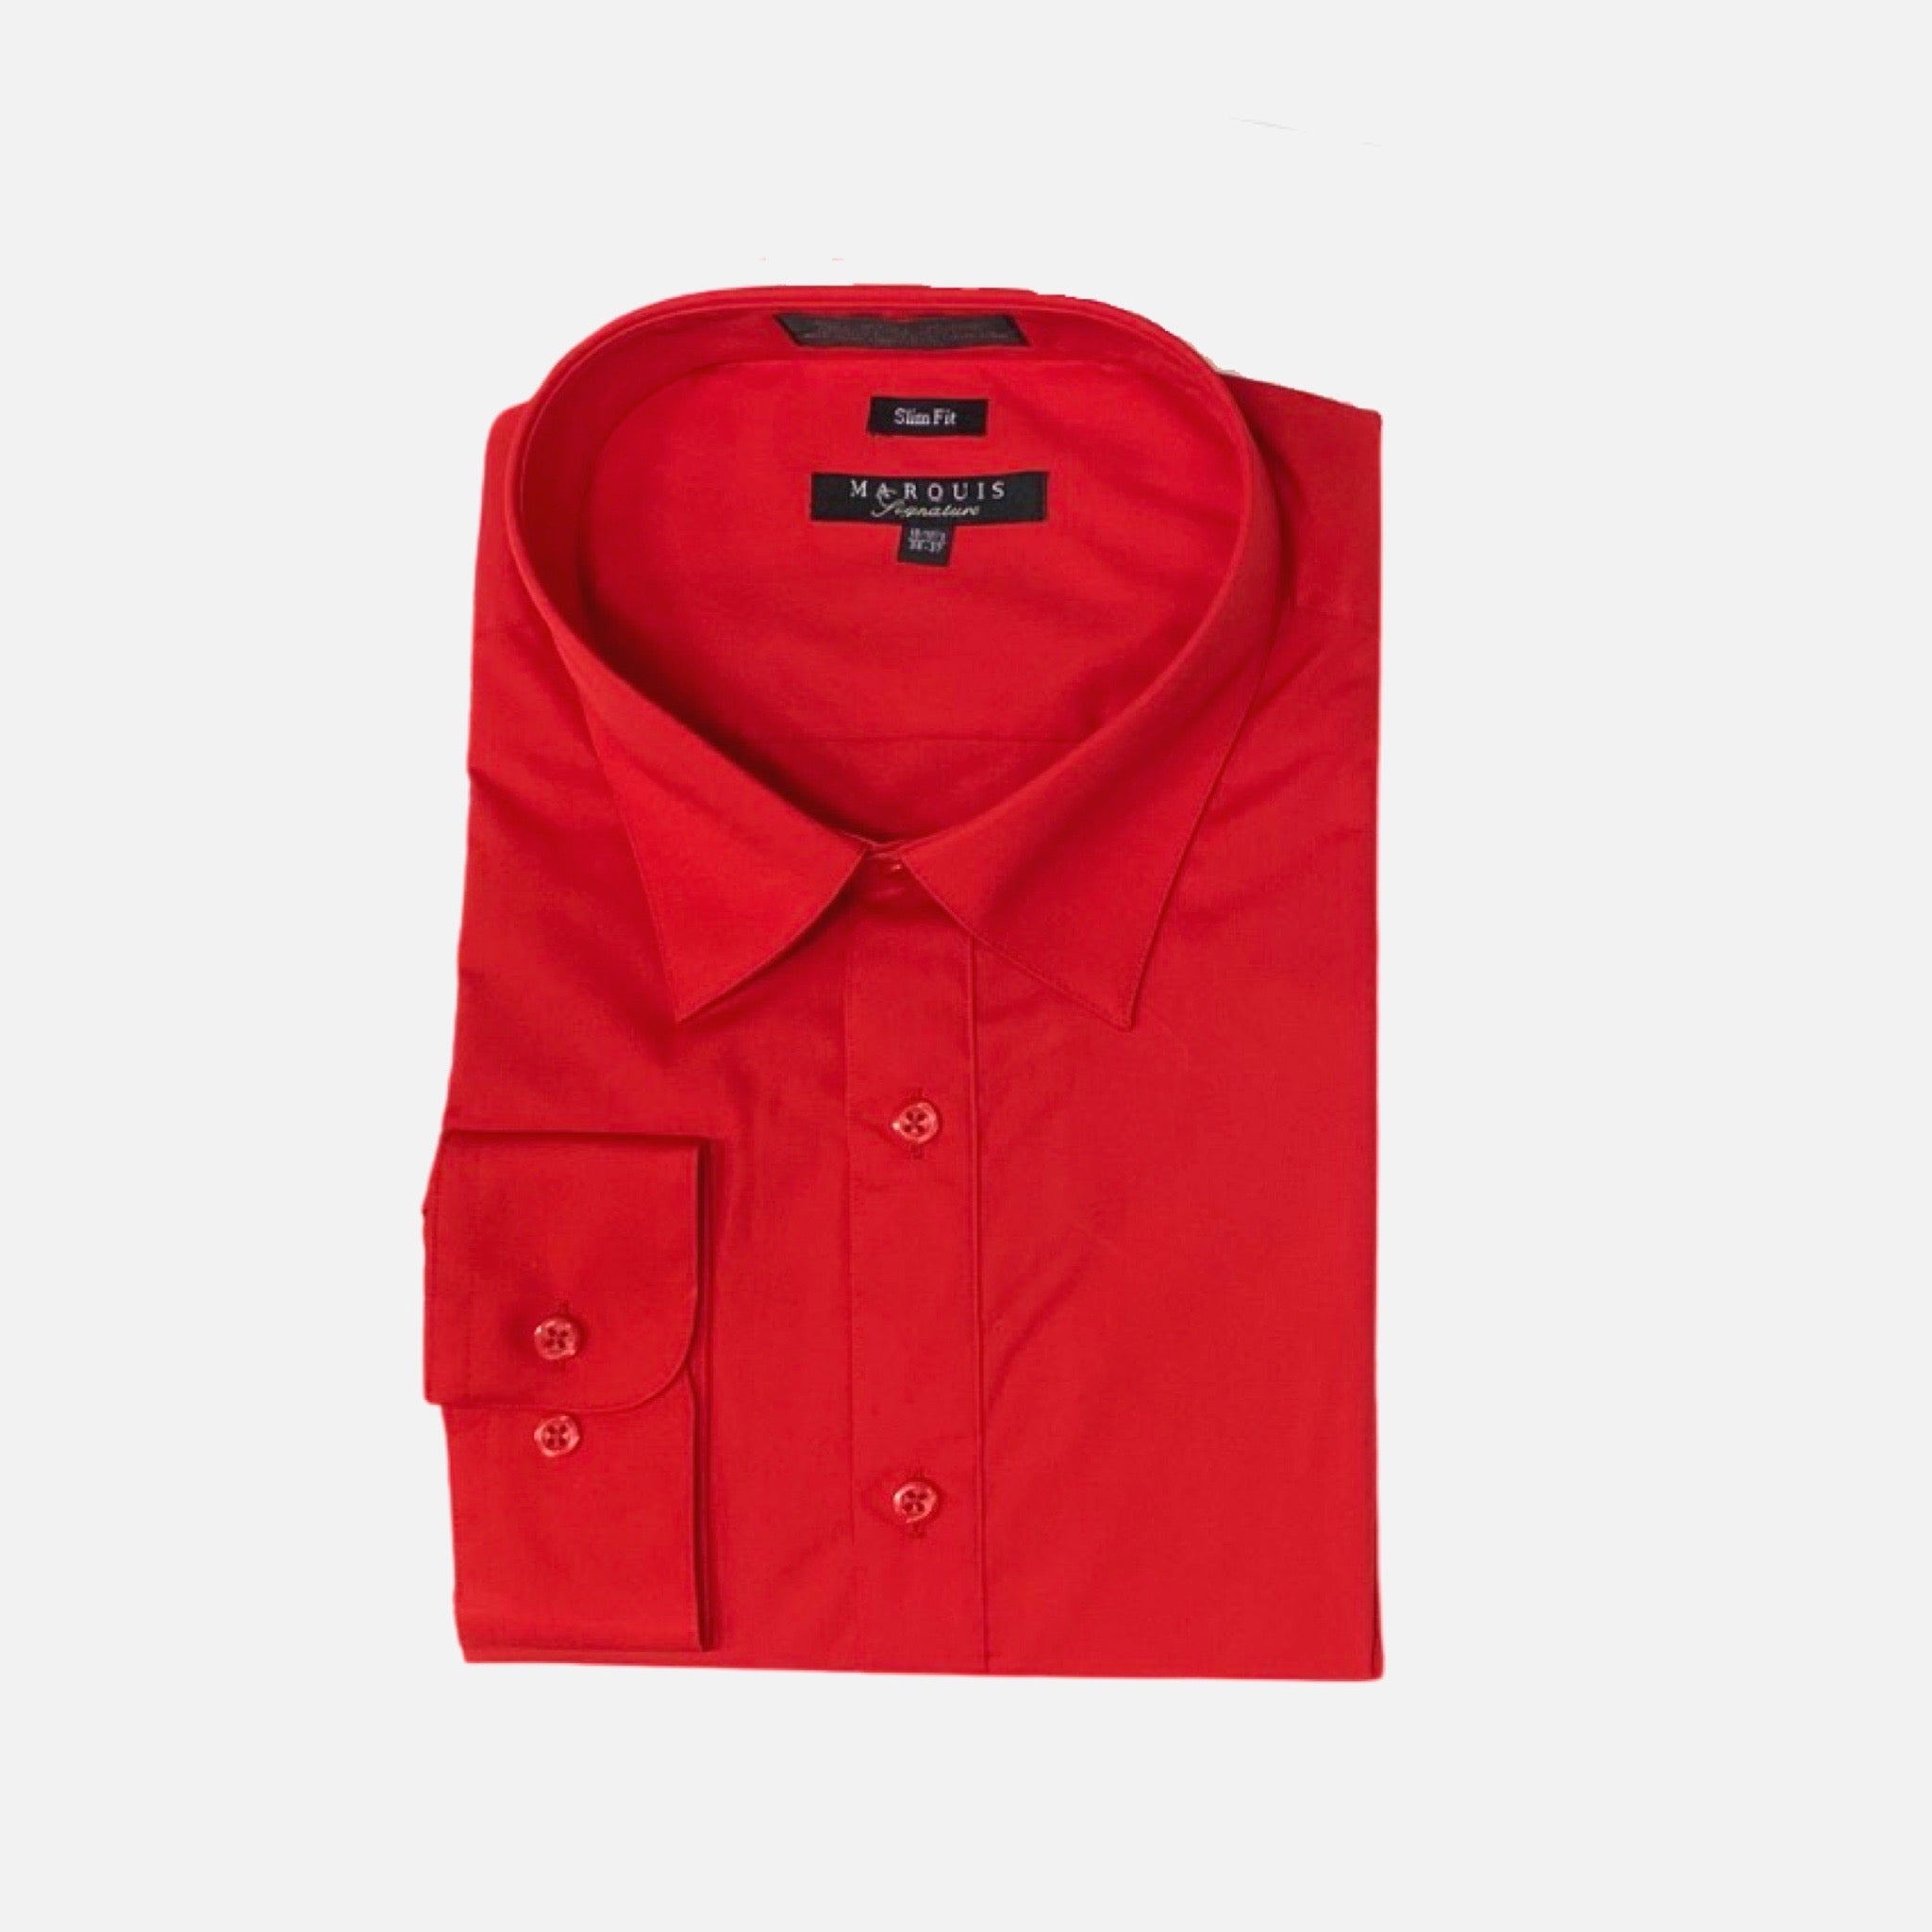 Mens Red Slim Fit Dress Shirt By Marquis